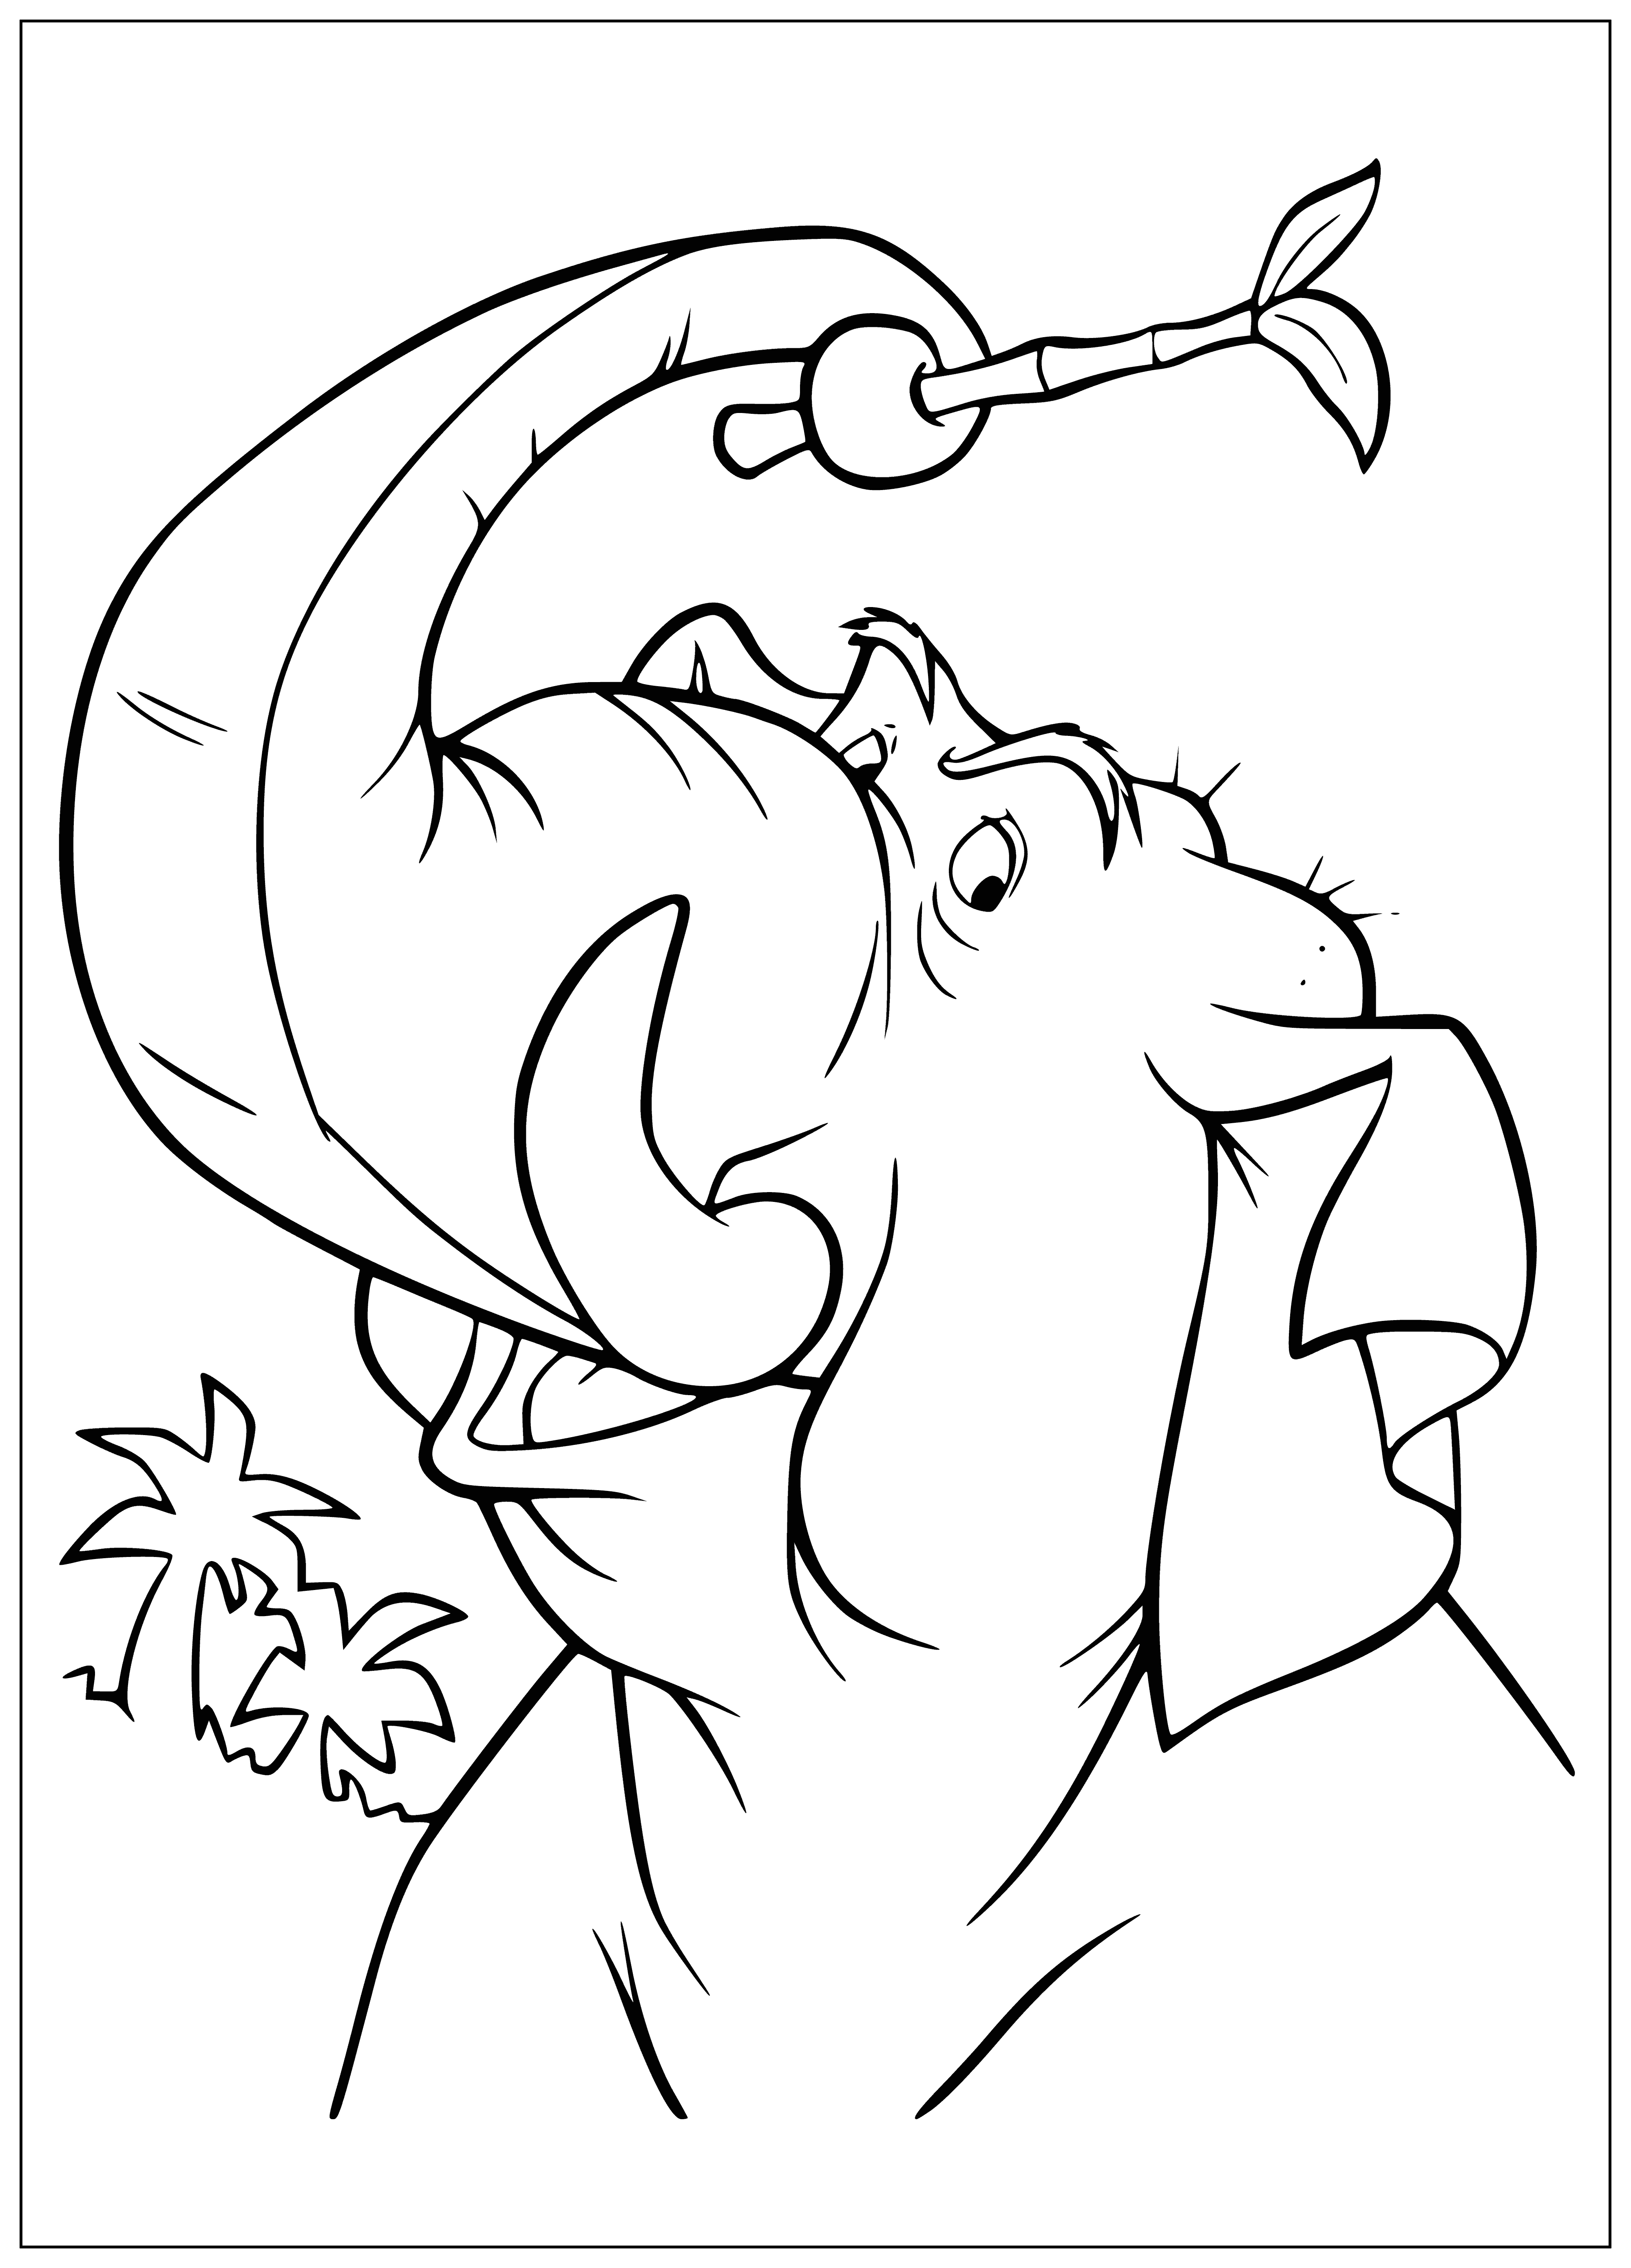 coloring page: Elephant in jungle eats leaves from tree; long trunk, large ears.